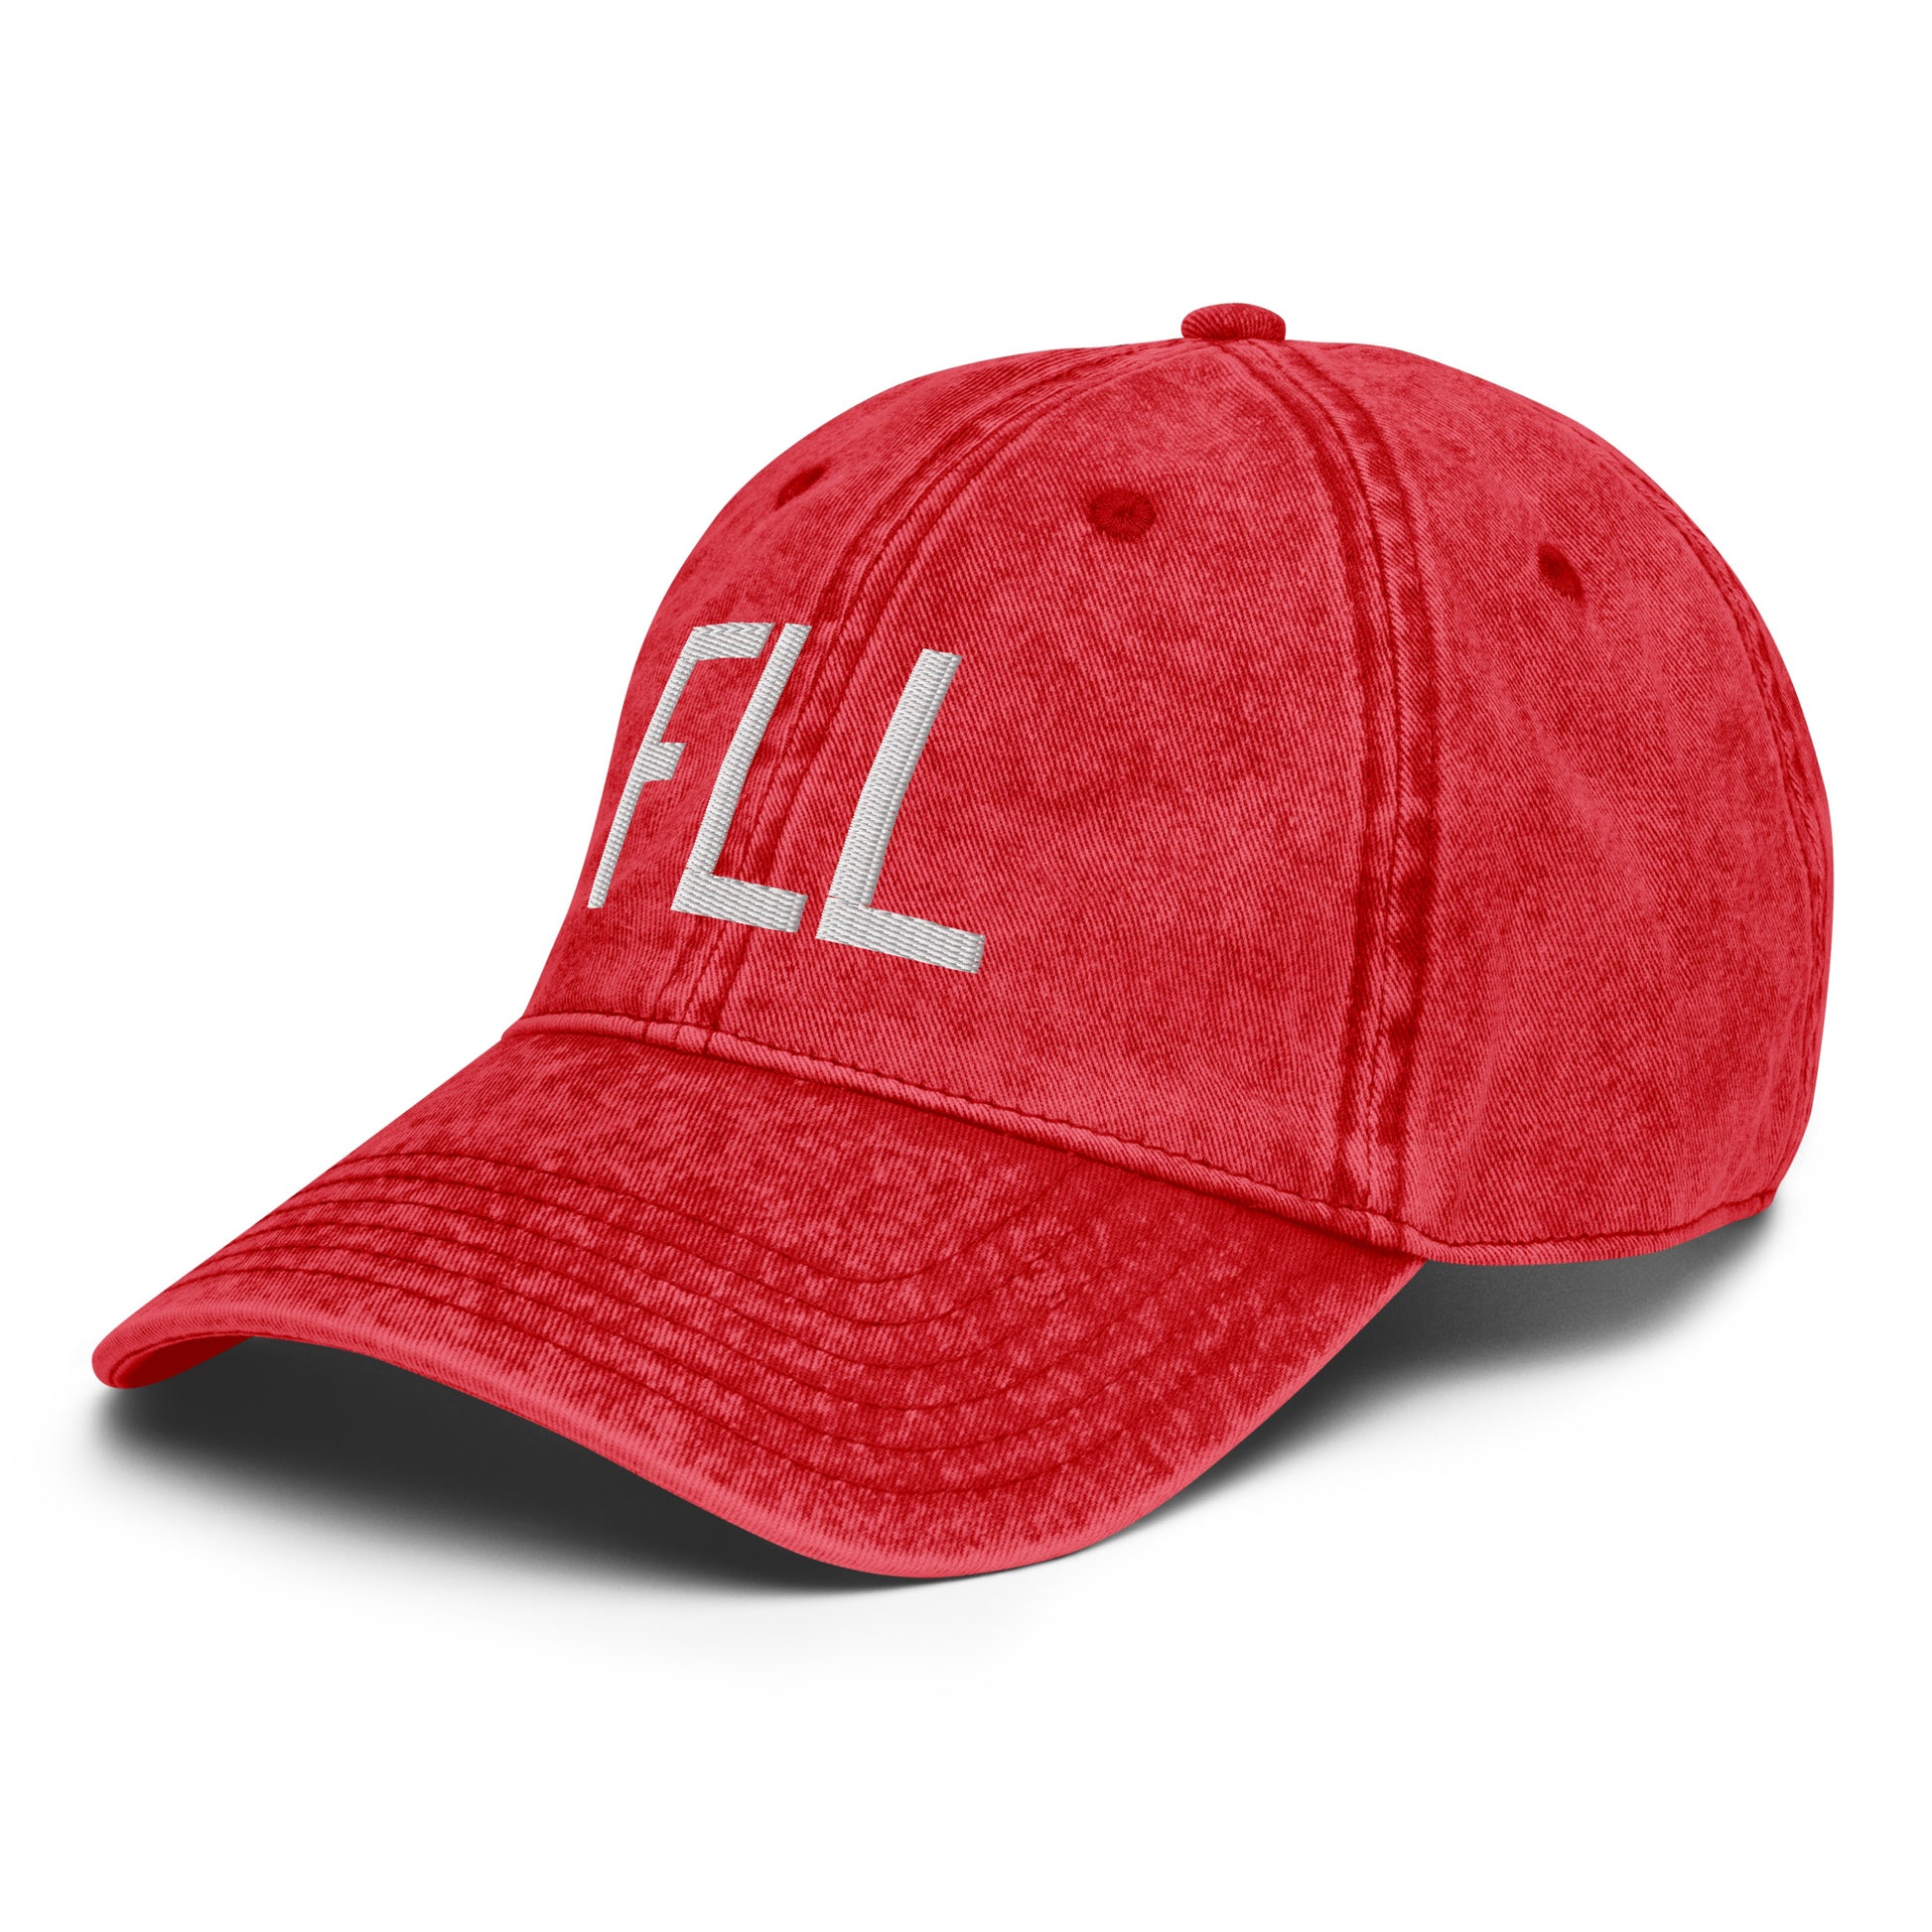 Airport Code Twill Cap - White • FLL Fort Lauderdale • YHM Designs - Image 23